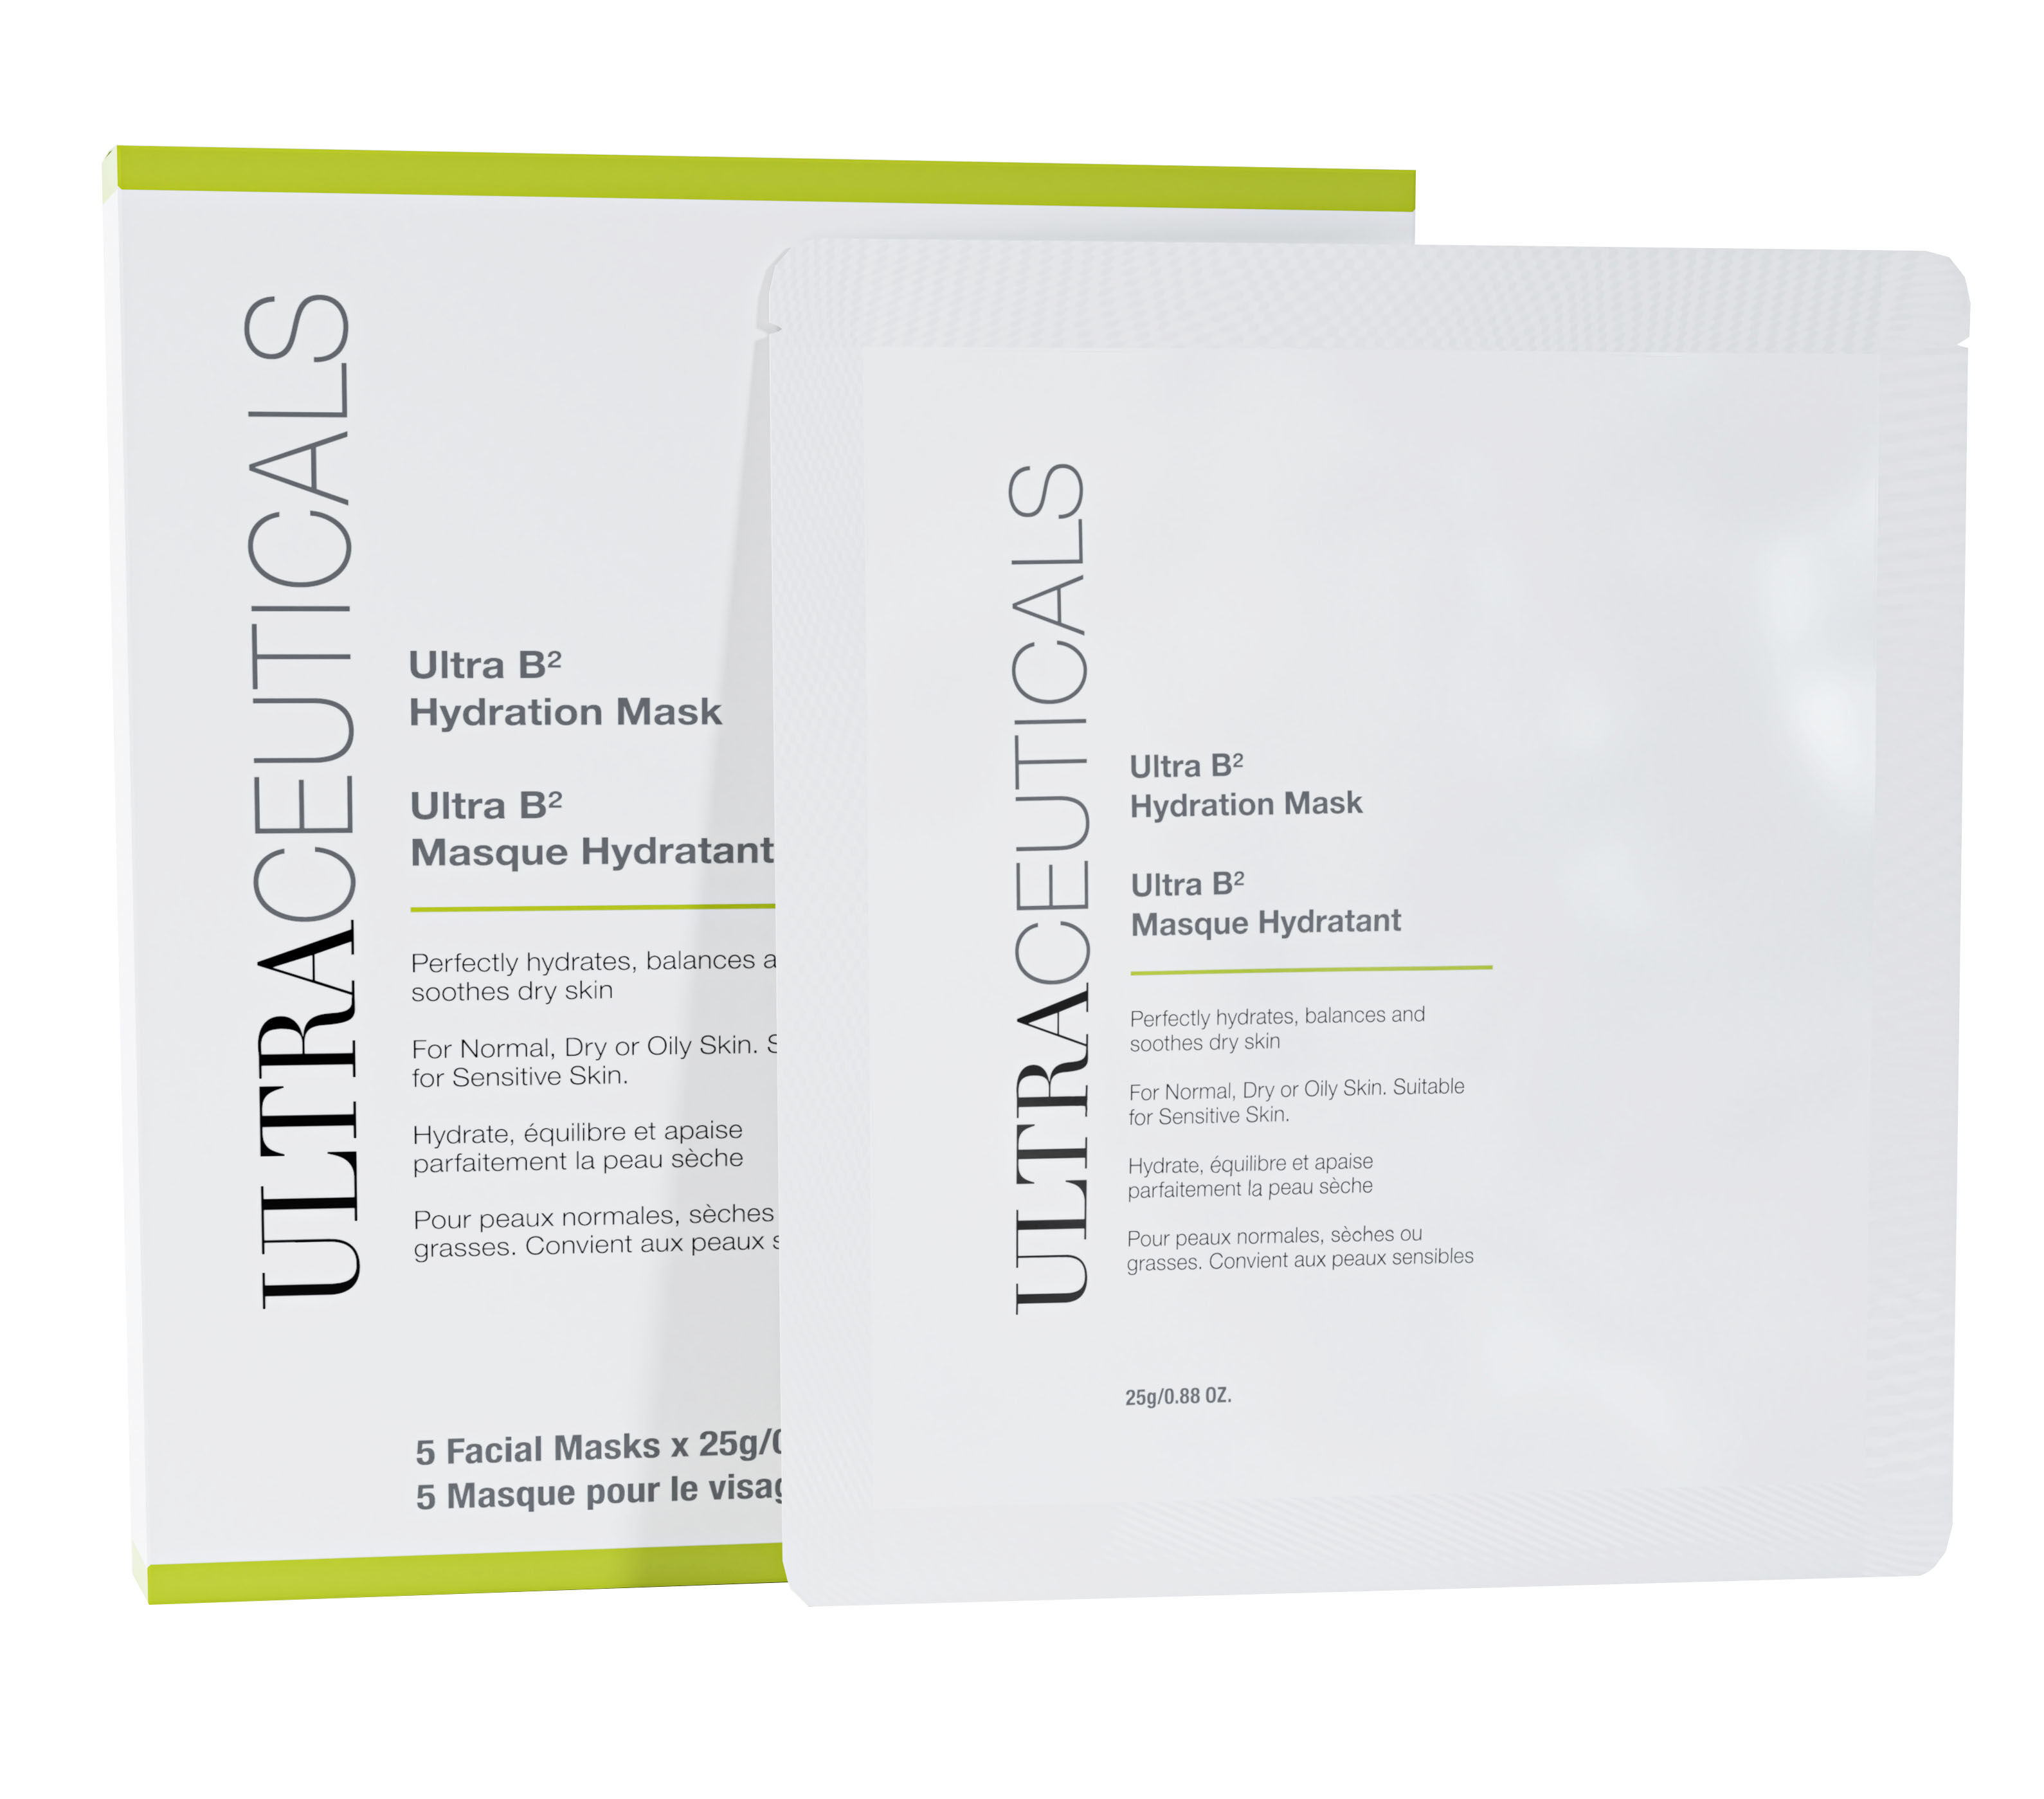 Ultraceuticals - NEW Ultra B2 Hydration Mask